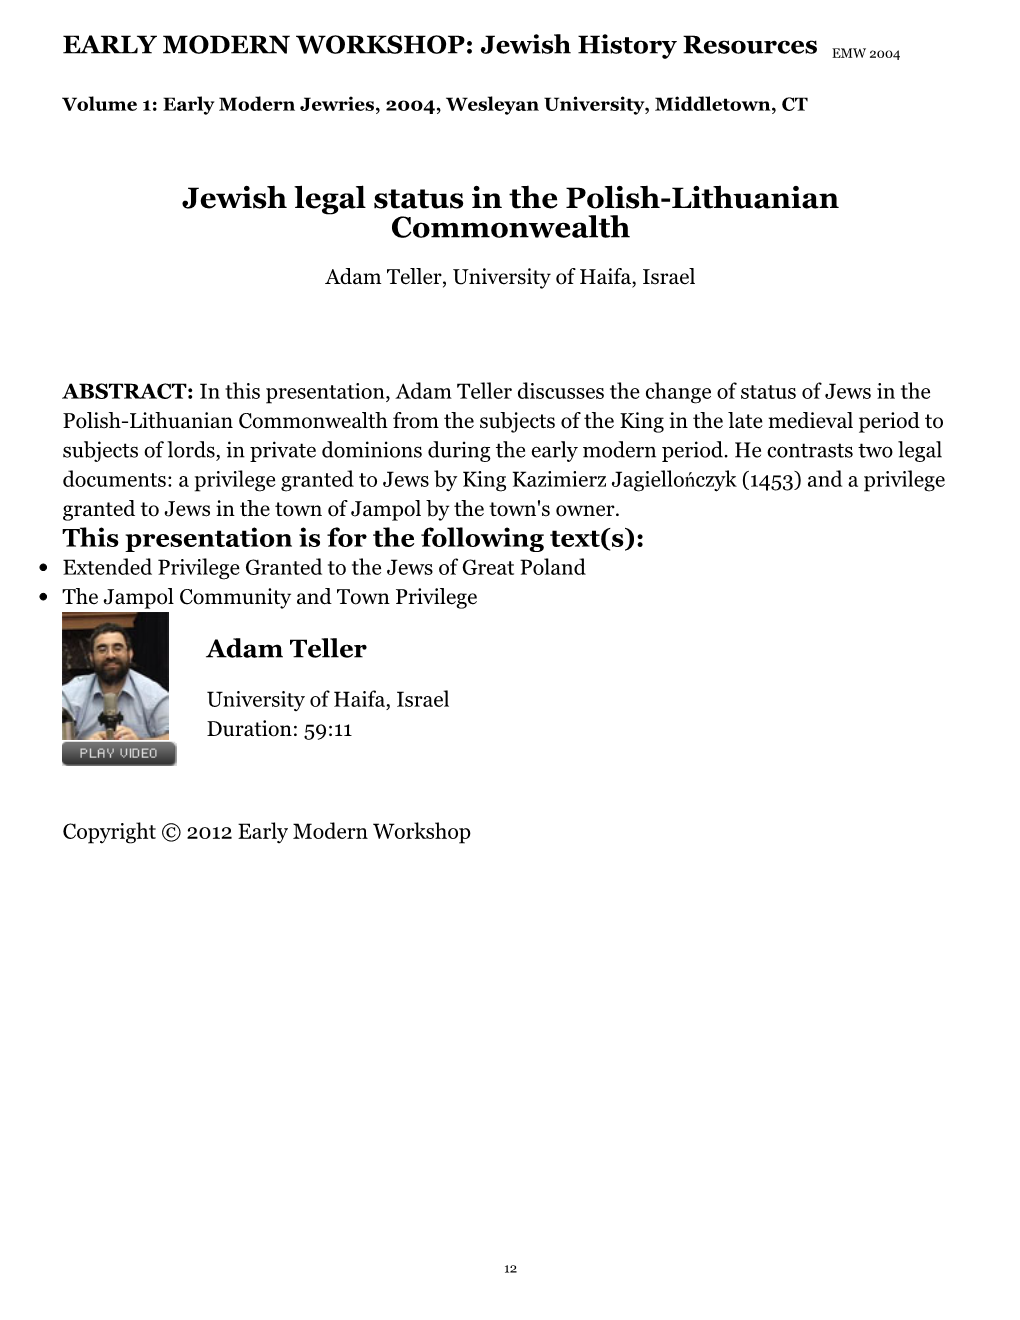 Jewish Legal Status in the Polish-Lithuanian Commonwealth